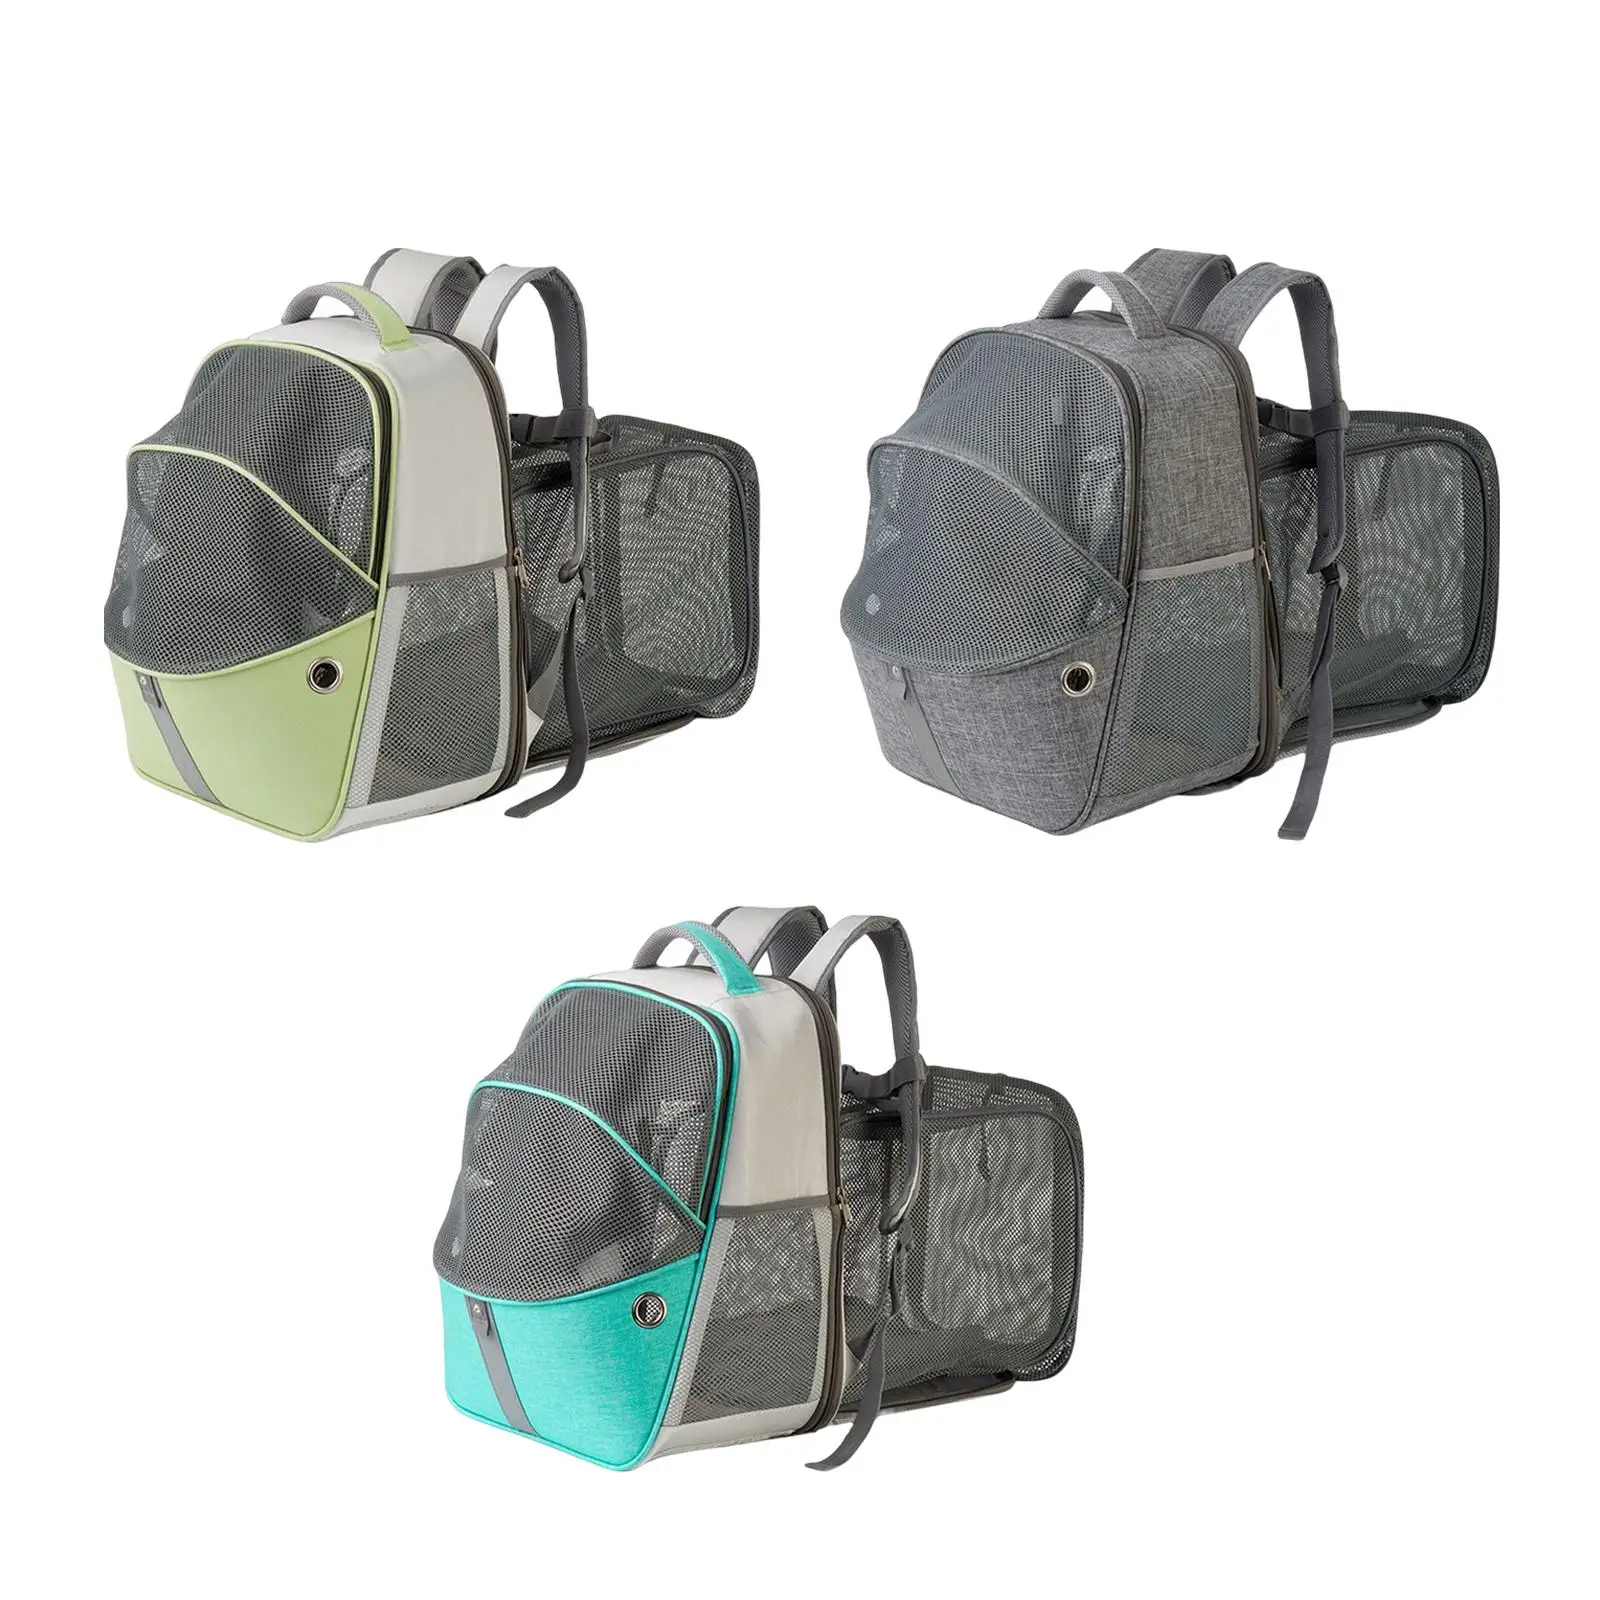 Collapsible Pet Carrier Travel Transport Bag Cat Dog Carrier Breathable Cat Backpack Expandable for Travel Small Dog Kitten